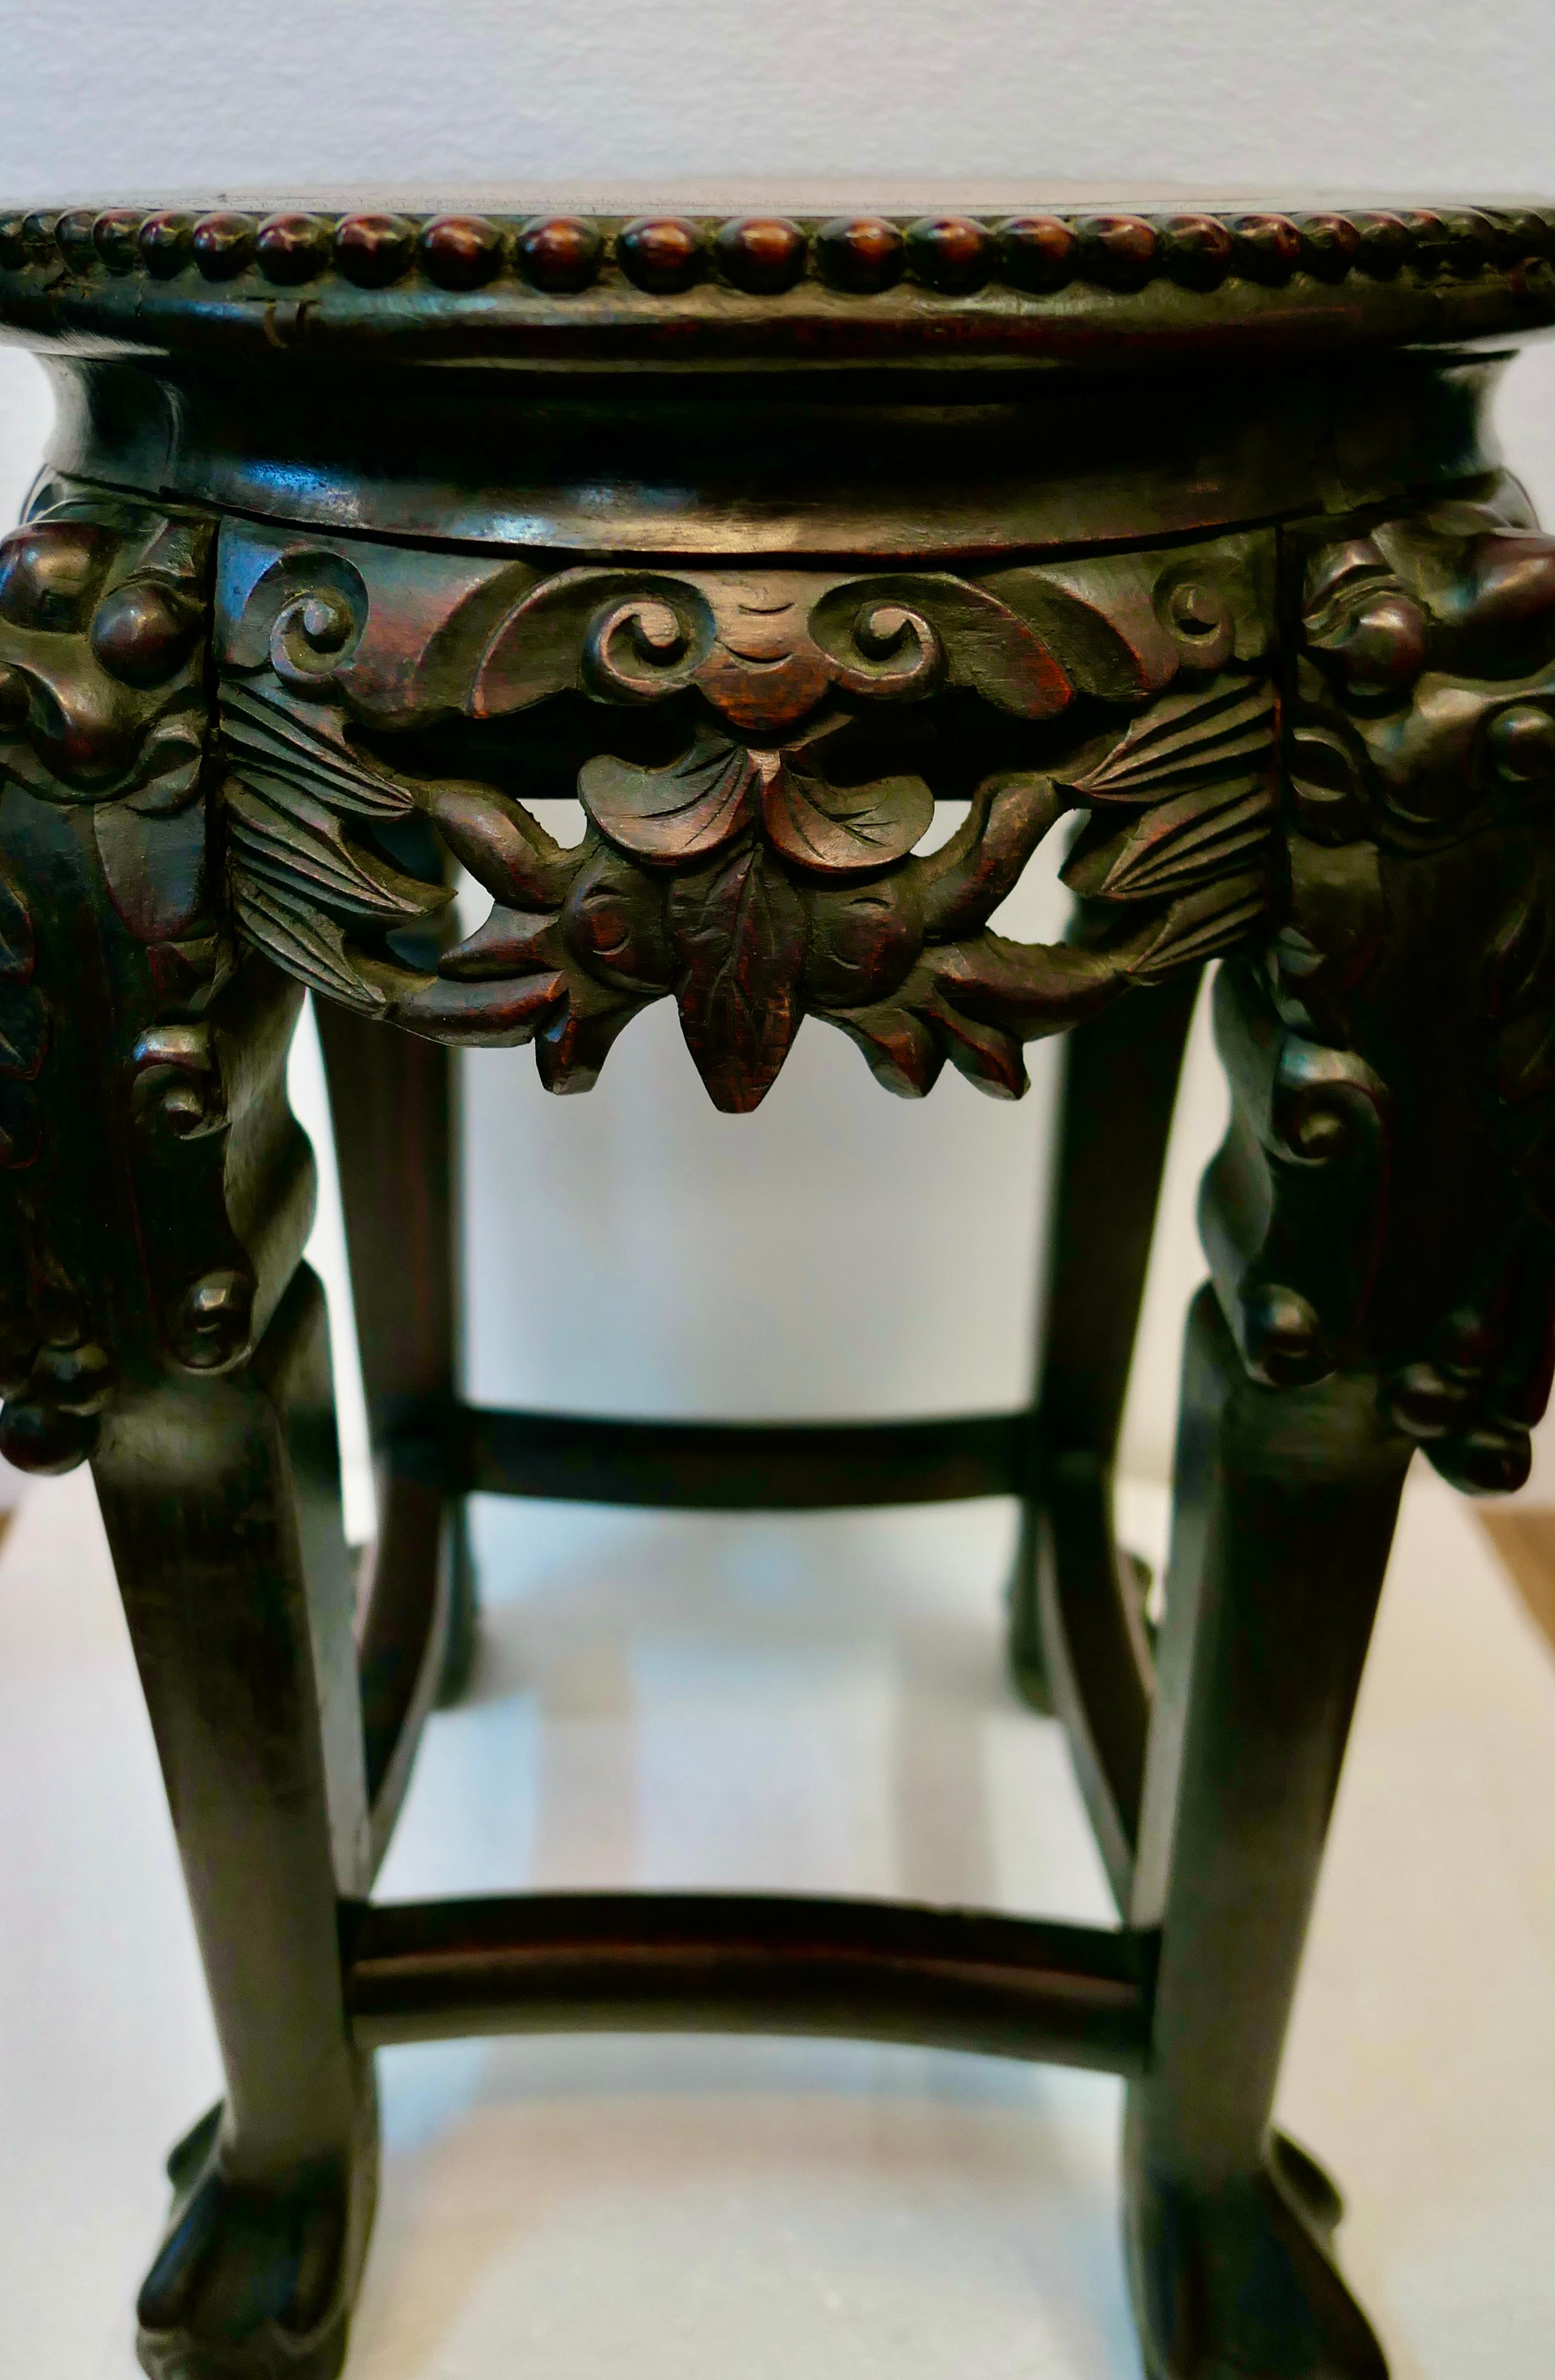 This antique hand crafted Chinese teak table dates from the late 1890’s & has a wonderful “old world” appearance. It has intricate carved panels accented between carved deity inspired legs with ball & claw feet. The top of the table has a wonderful